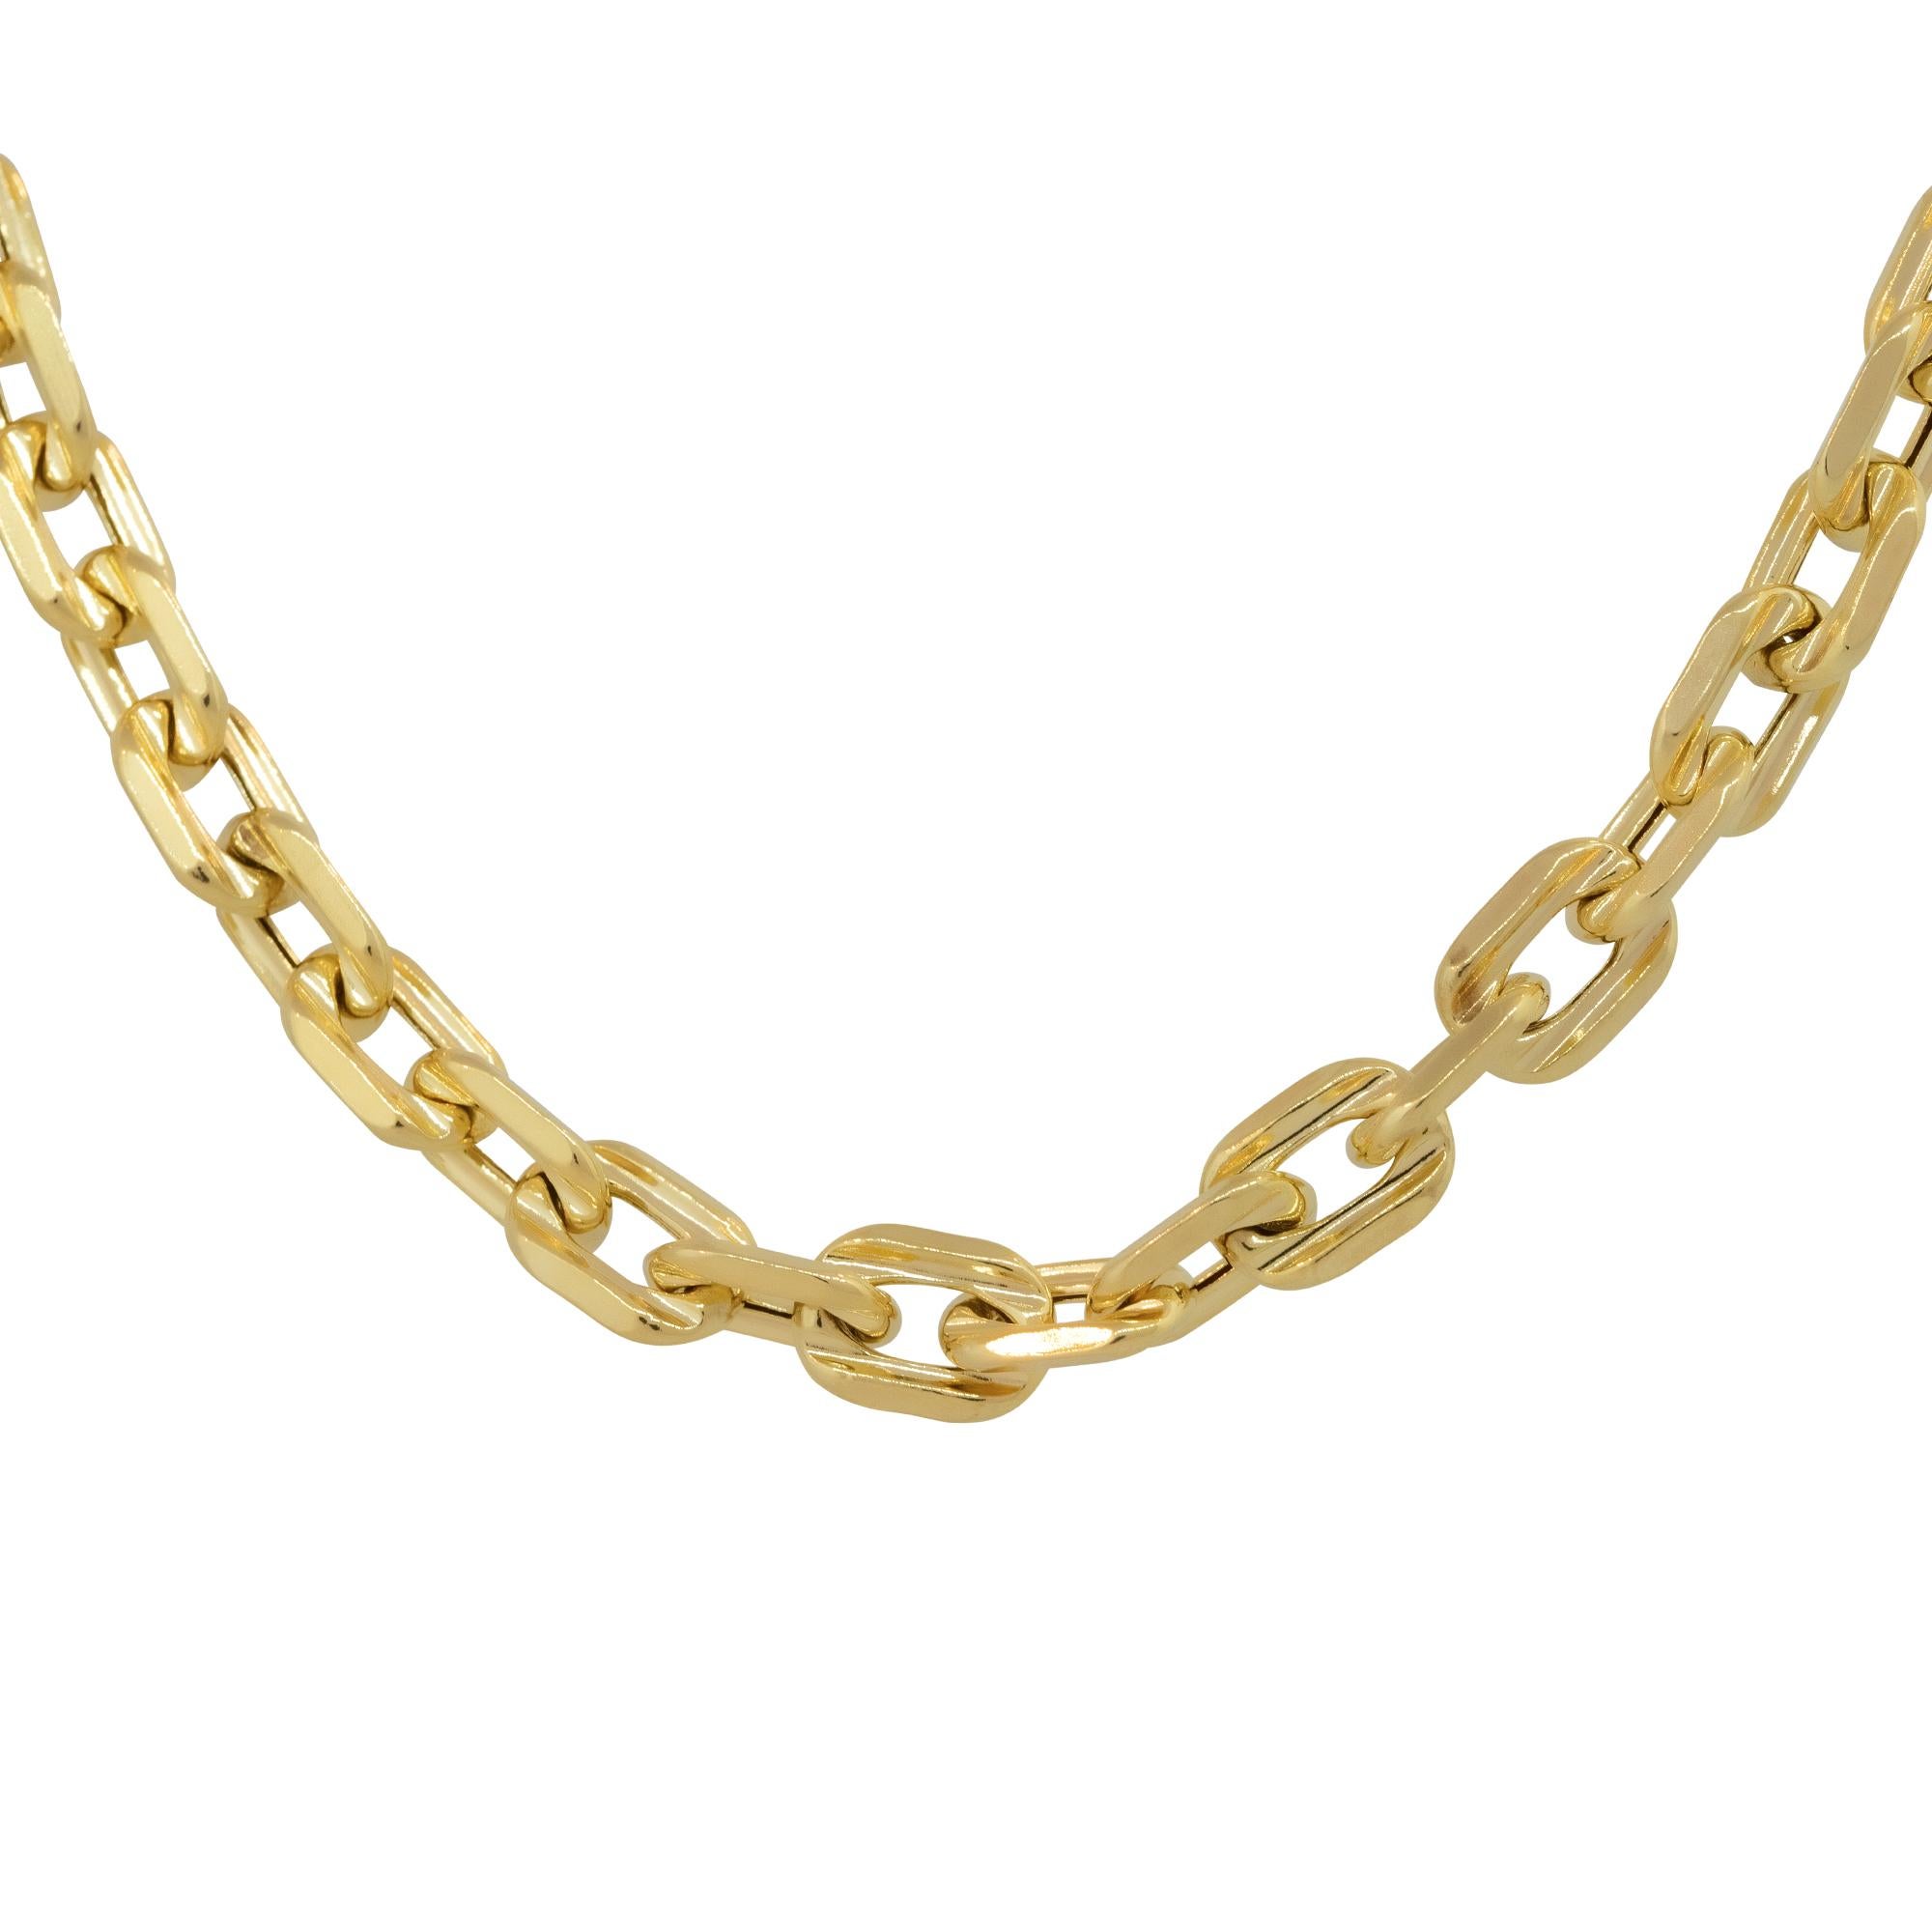 14k Yellow Gold 22.5″ Men's H-Link Chain

Material: 14k Yellow Gold
Measurements: Necklace Measures 22.5″ in Length and 6.2mm in Thickness
Fastening: Spring Ring Clasp
Item Weight: 19.8g (12.7dwt)
Additional Details: This item comes with a